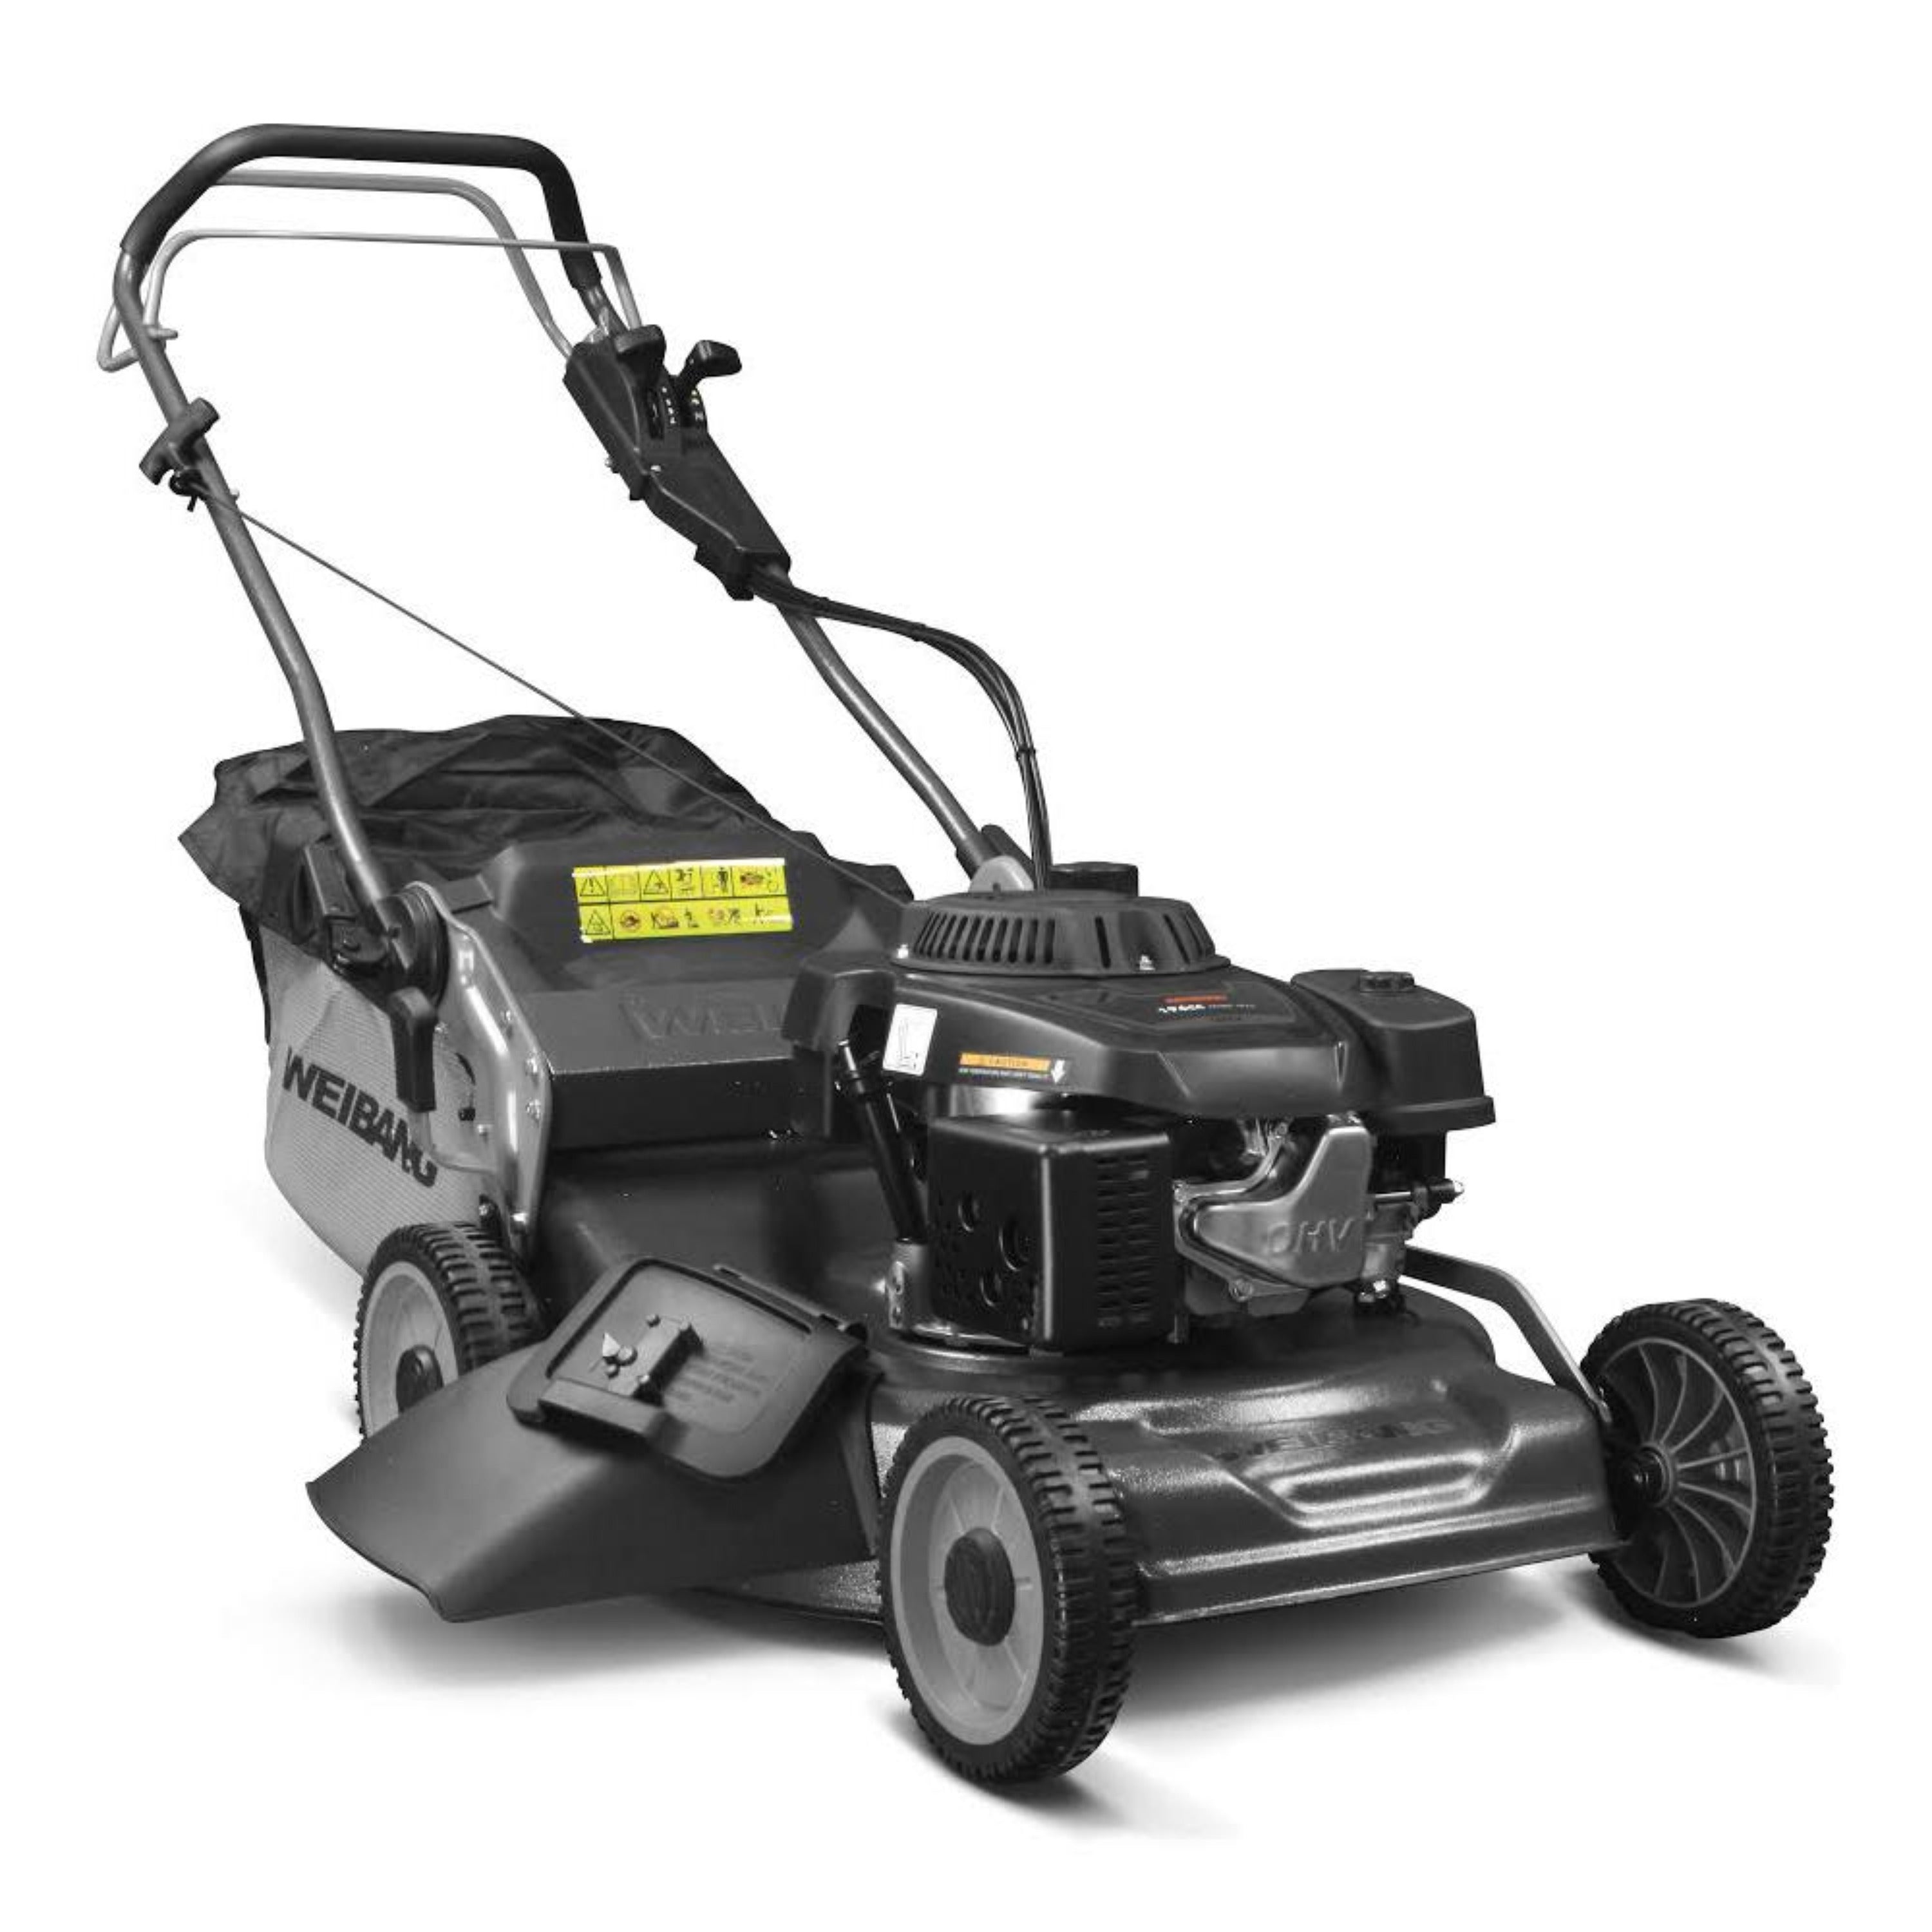 The Weibang SD is our commercial 3 in 1 mower. With our class leading 196cc engine and shaft drive technology this mower is extremely strong and durable. 